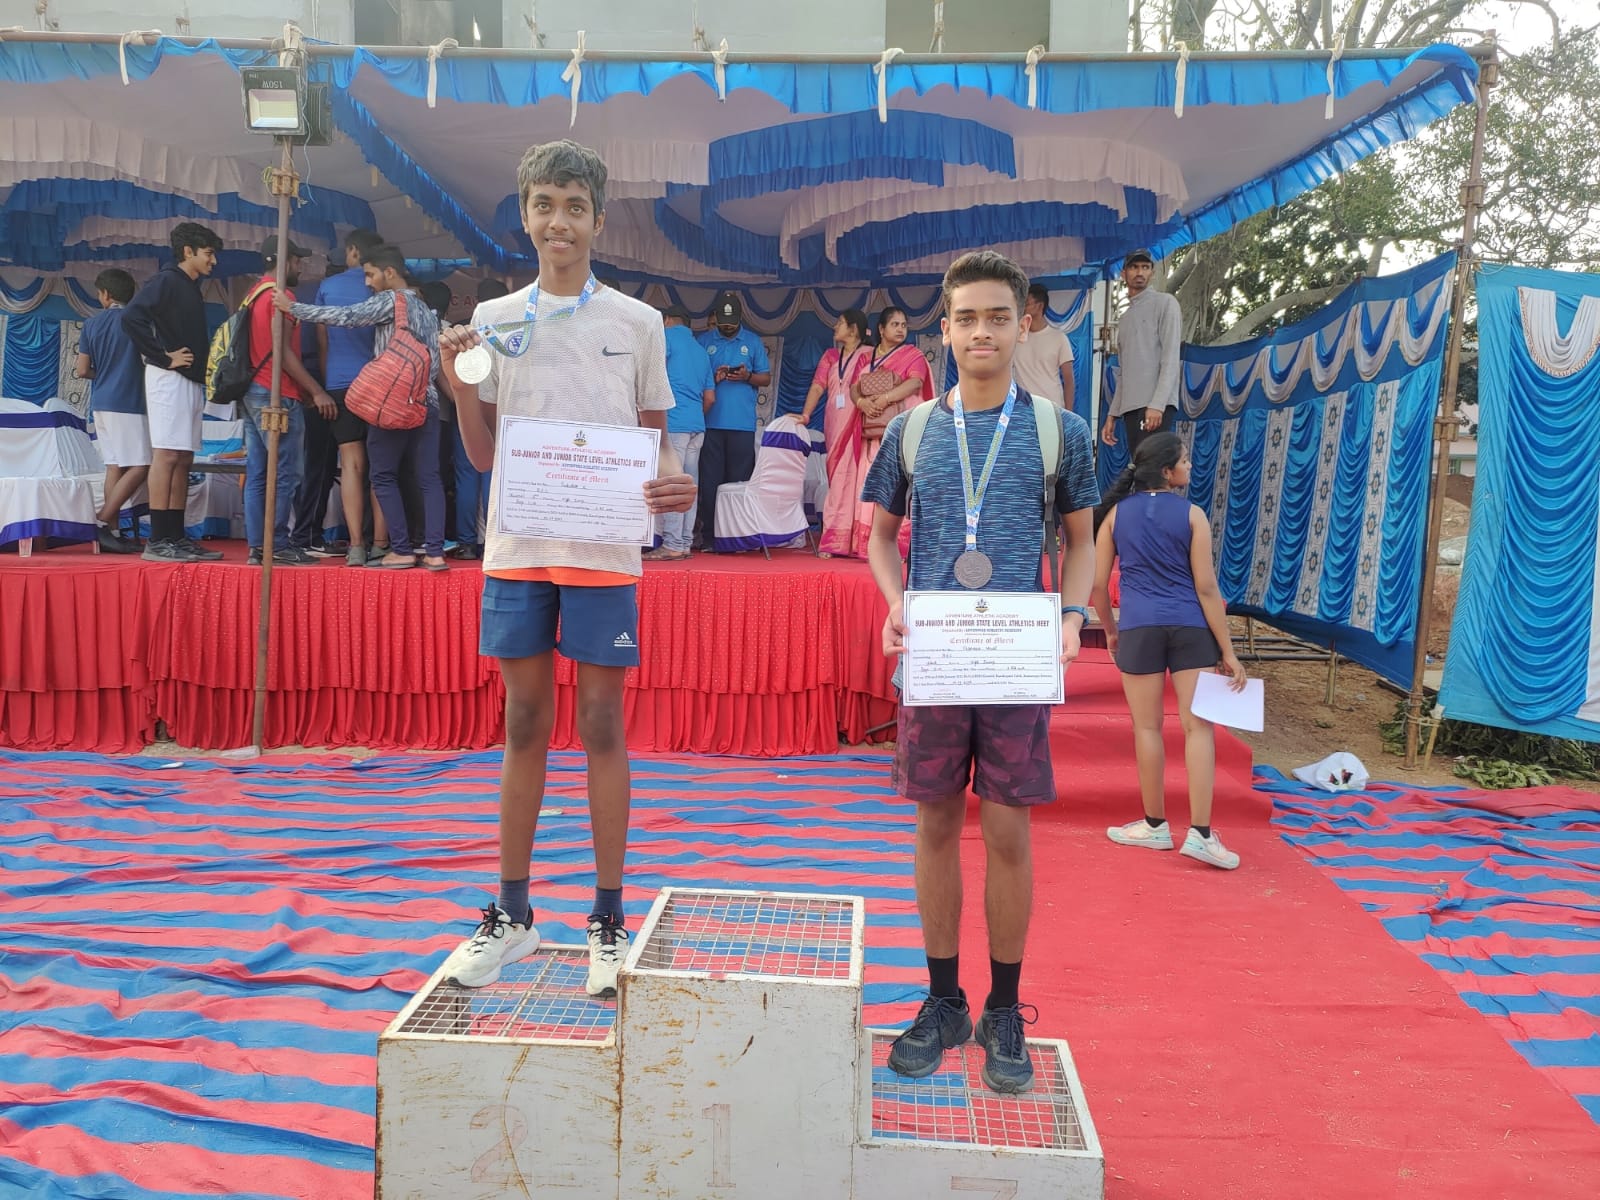 Twelve students from VNS participated in the State Level Sub Junior and Junior Athletics Championship held at Kanakapura on 27th and 28th January 2022.